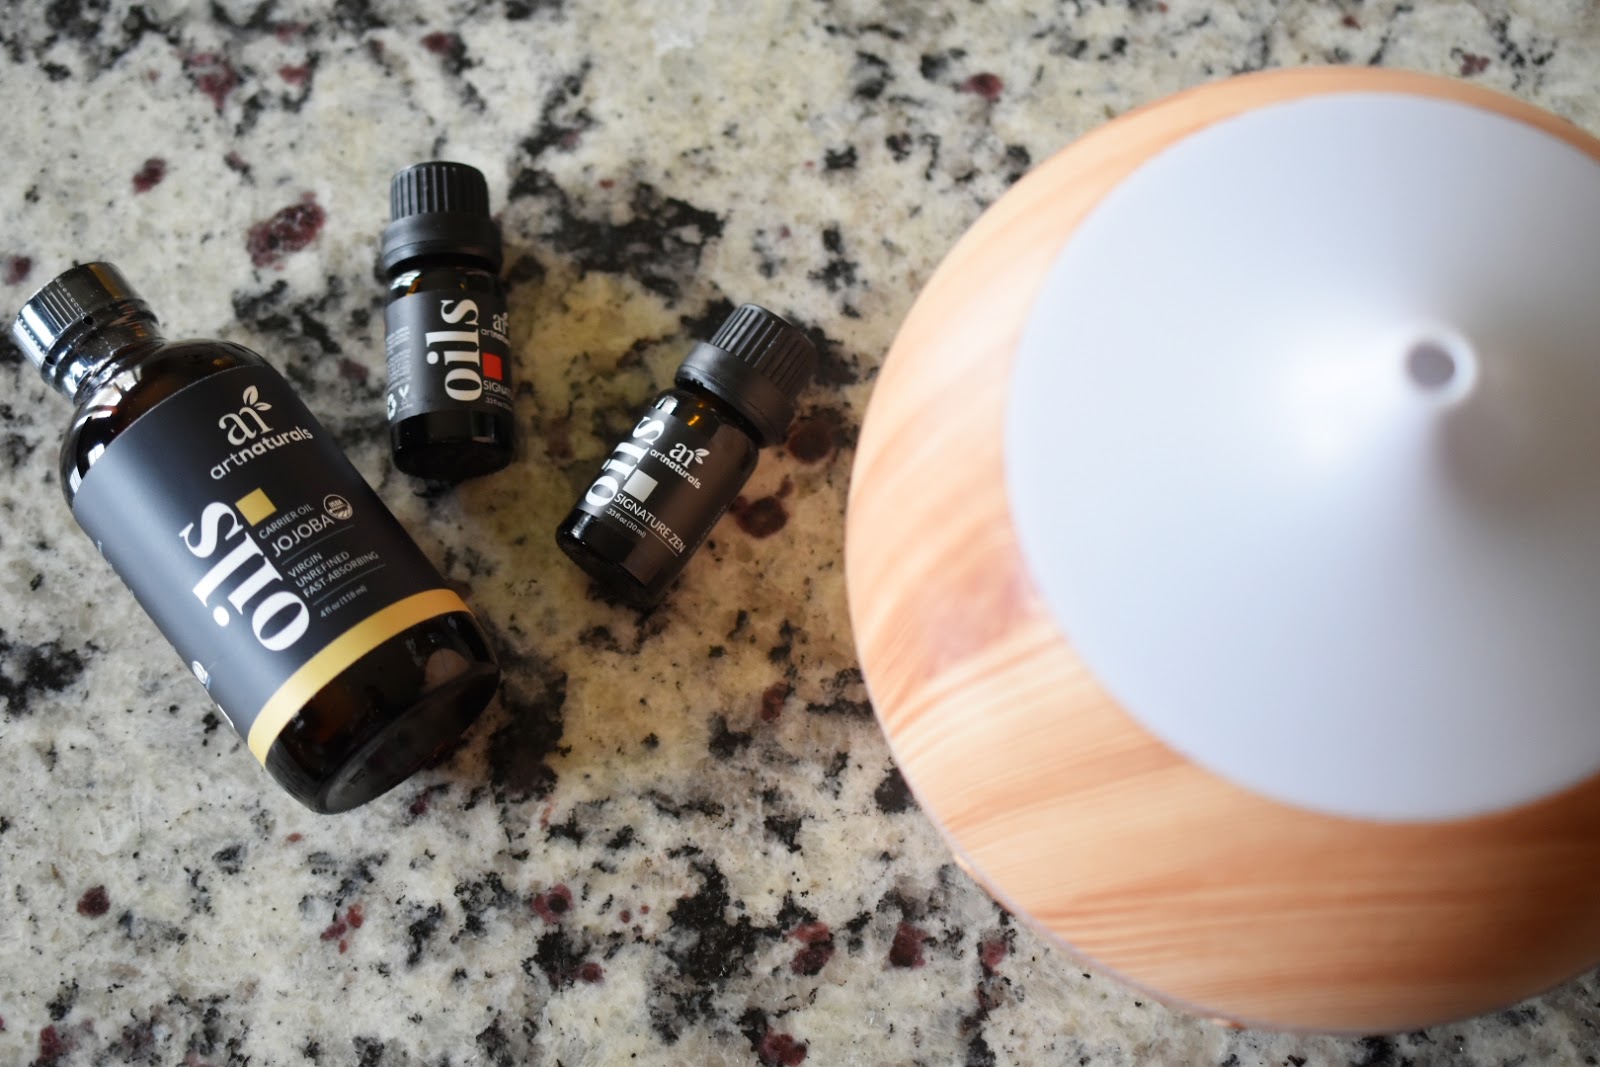 Brighten Mood and Spirit Naturally with artnatural Oil Diffuser  via  www.productreviewmom.com